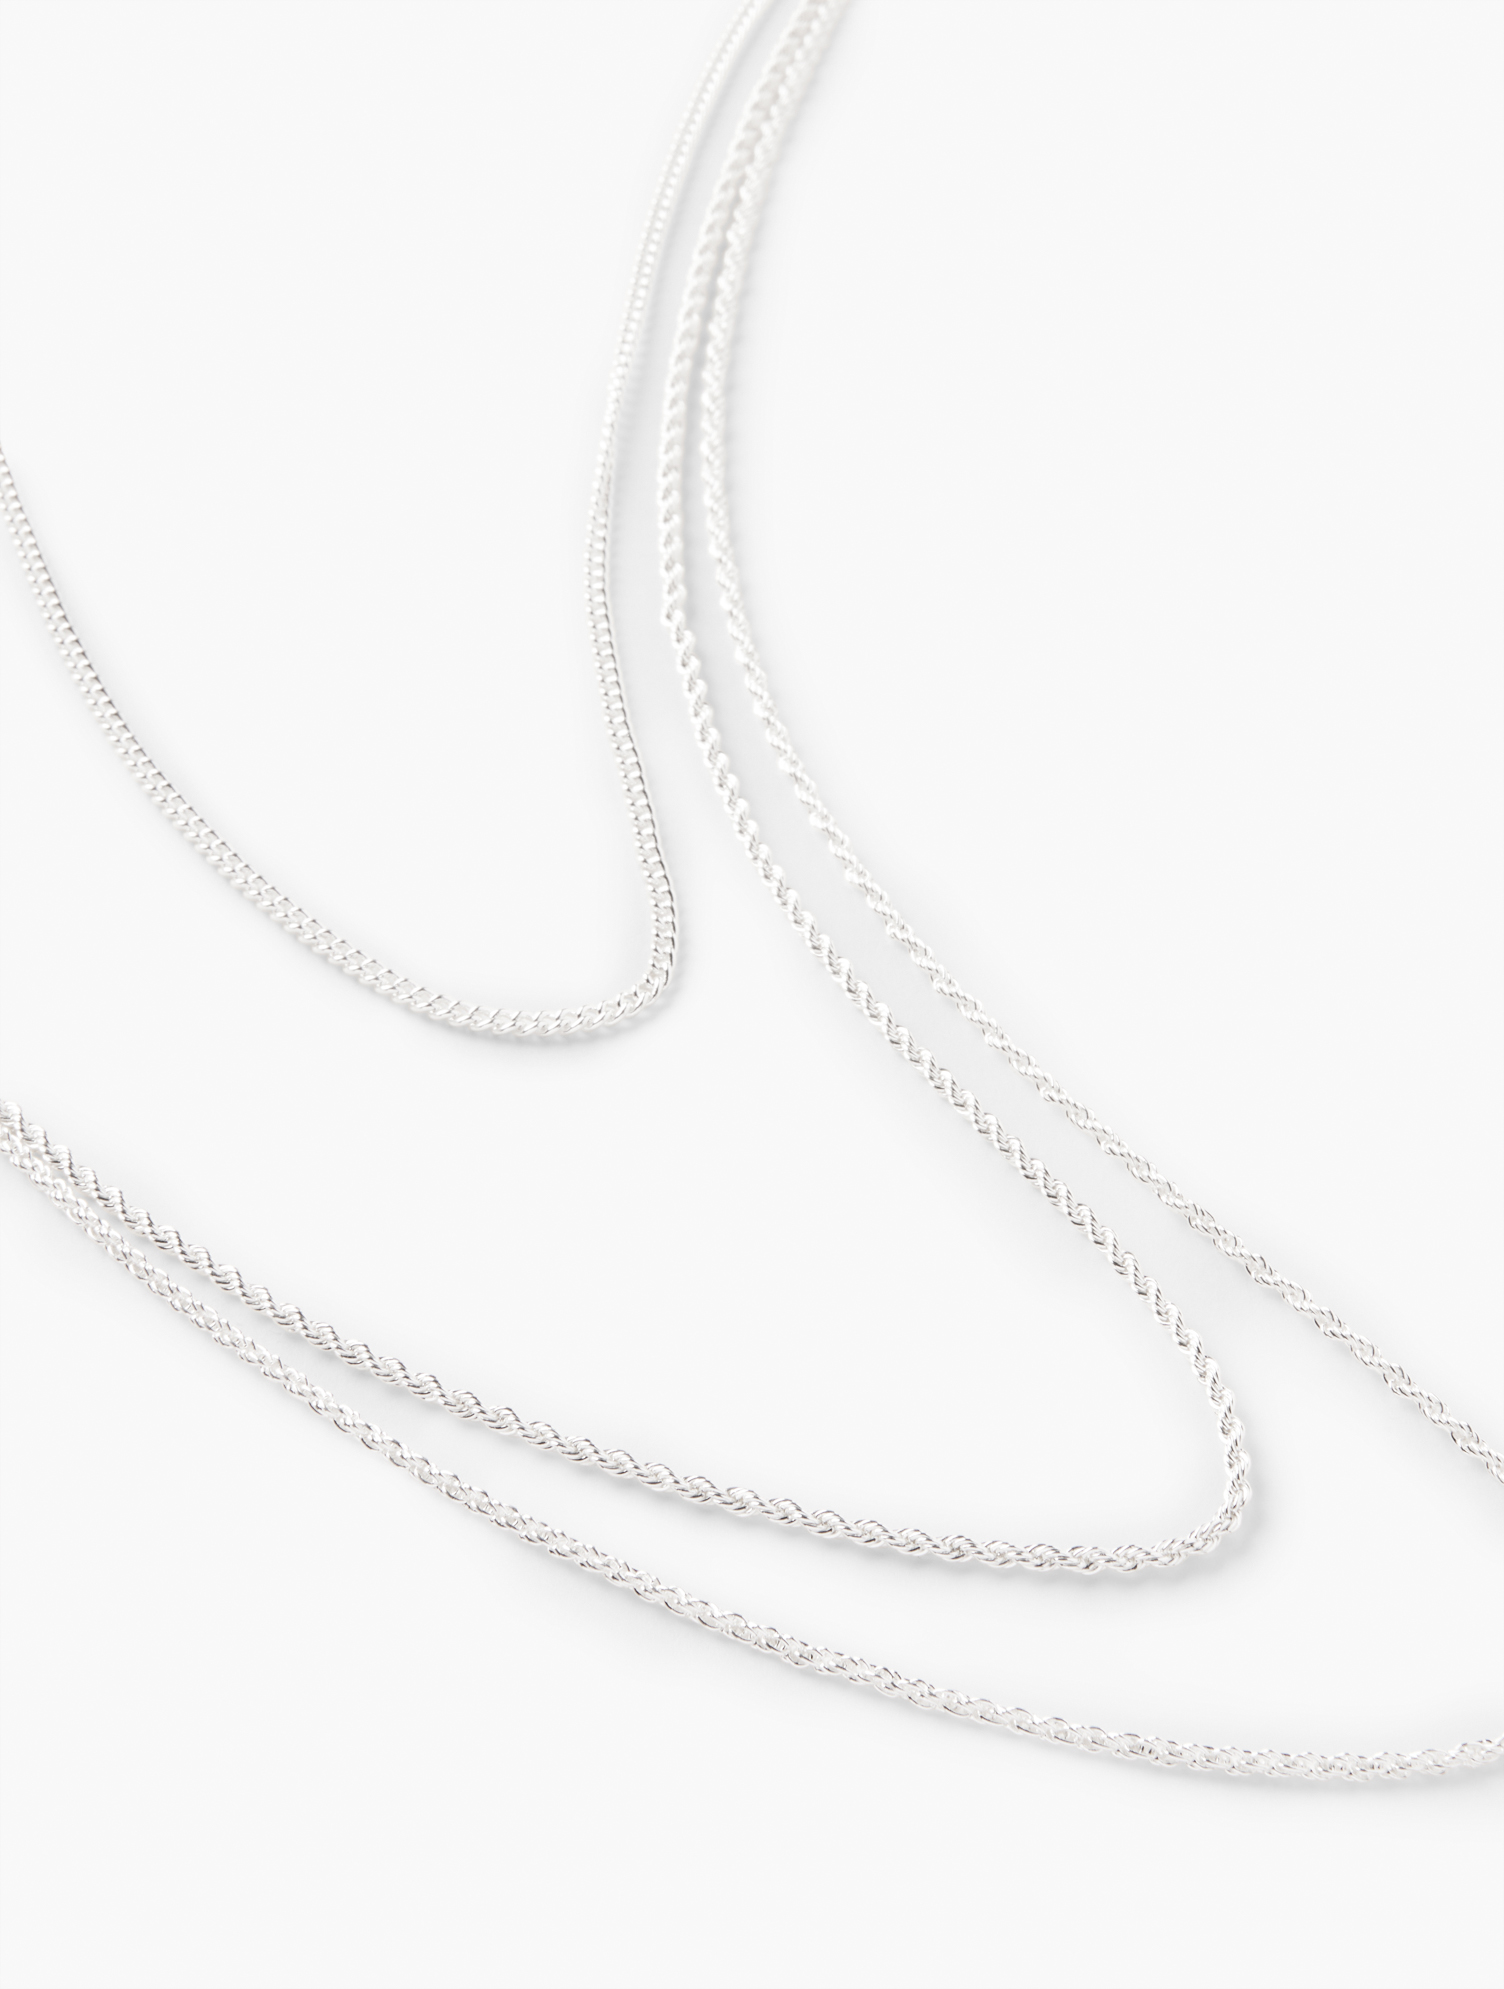 Talbots Layered Chain Necklace - Shiny Silver - 001